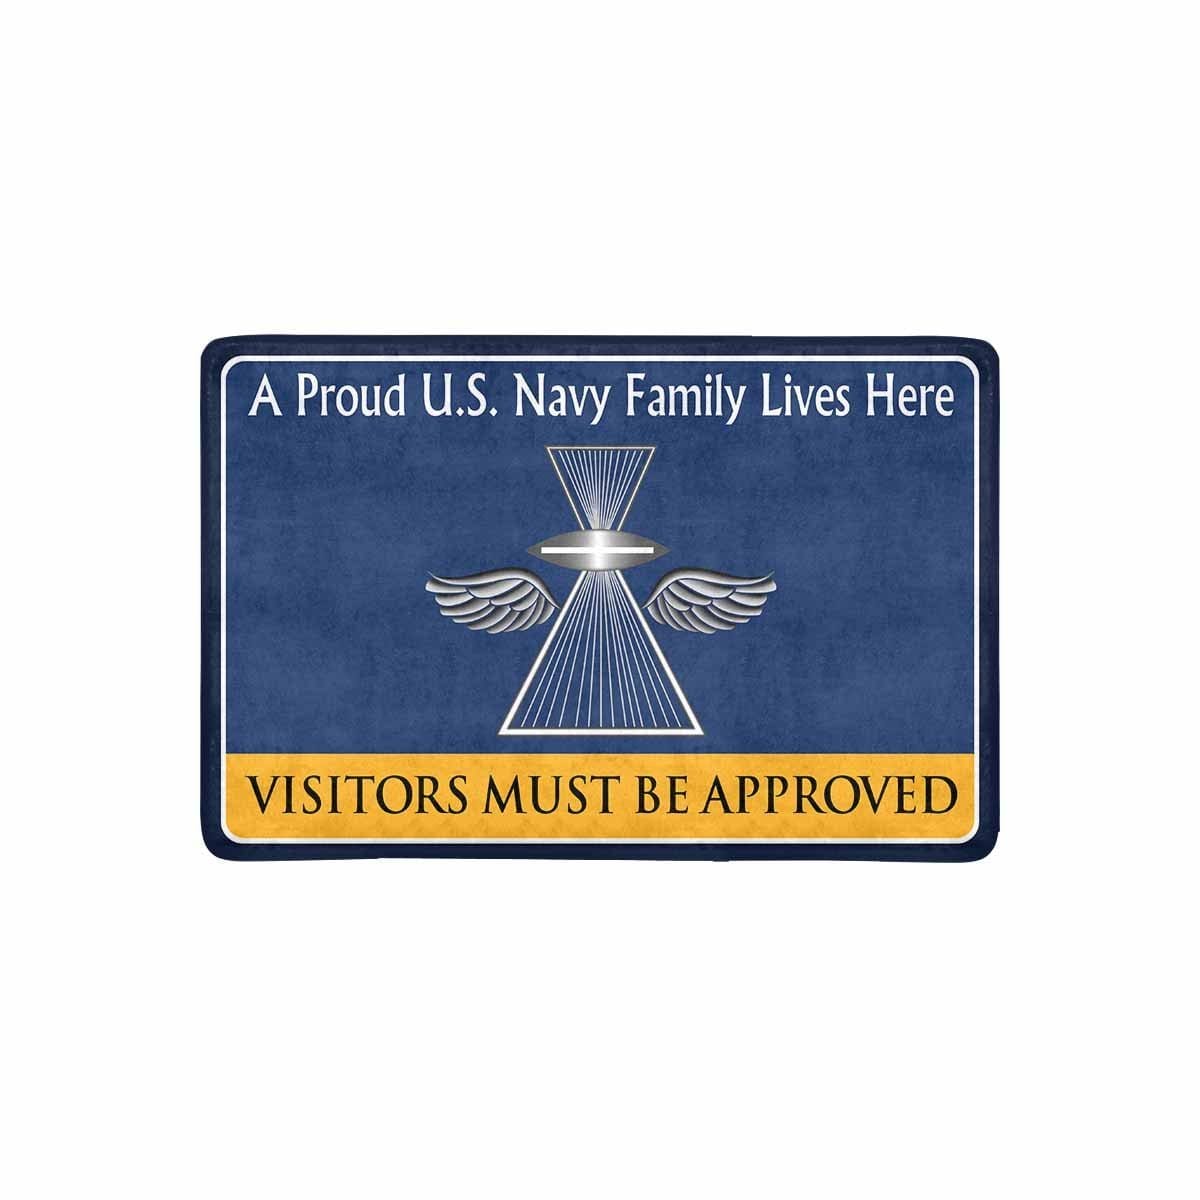 US Navy Photographer's Mate Navy PH Family Doormat - Visitors must be approved (23,6 inches x 15,7 inches)-Doormat-Navy-Rate-Veterans Nation